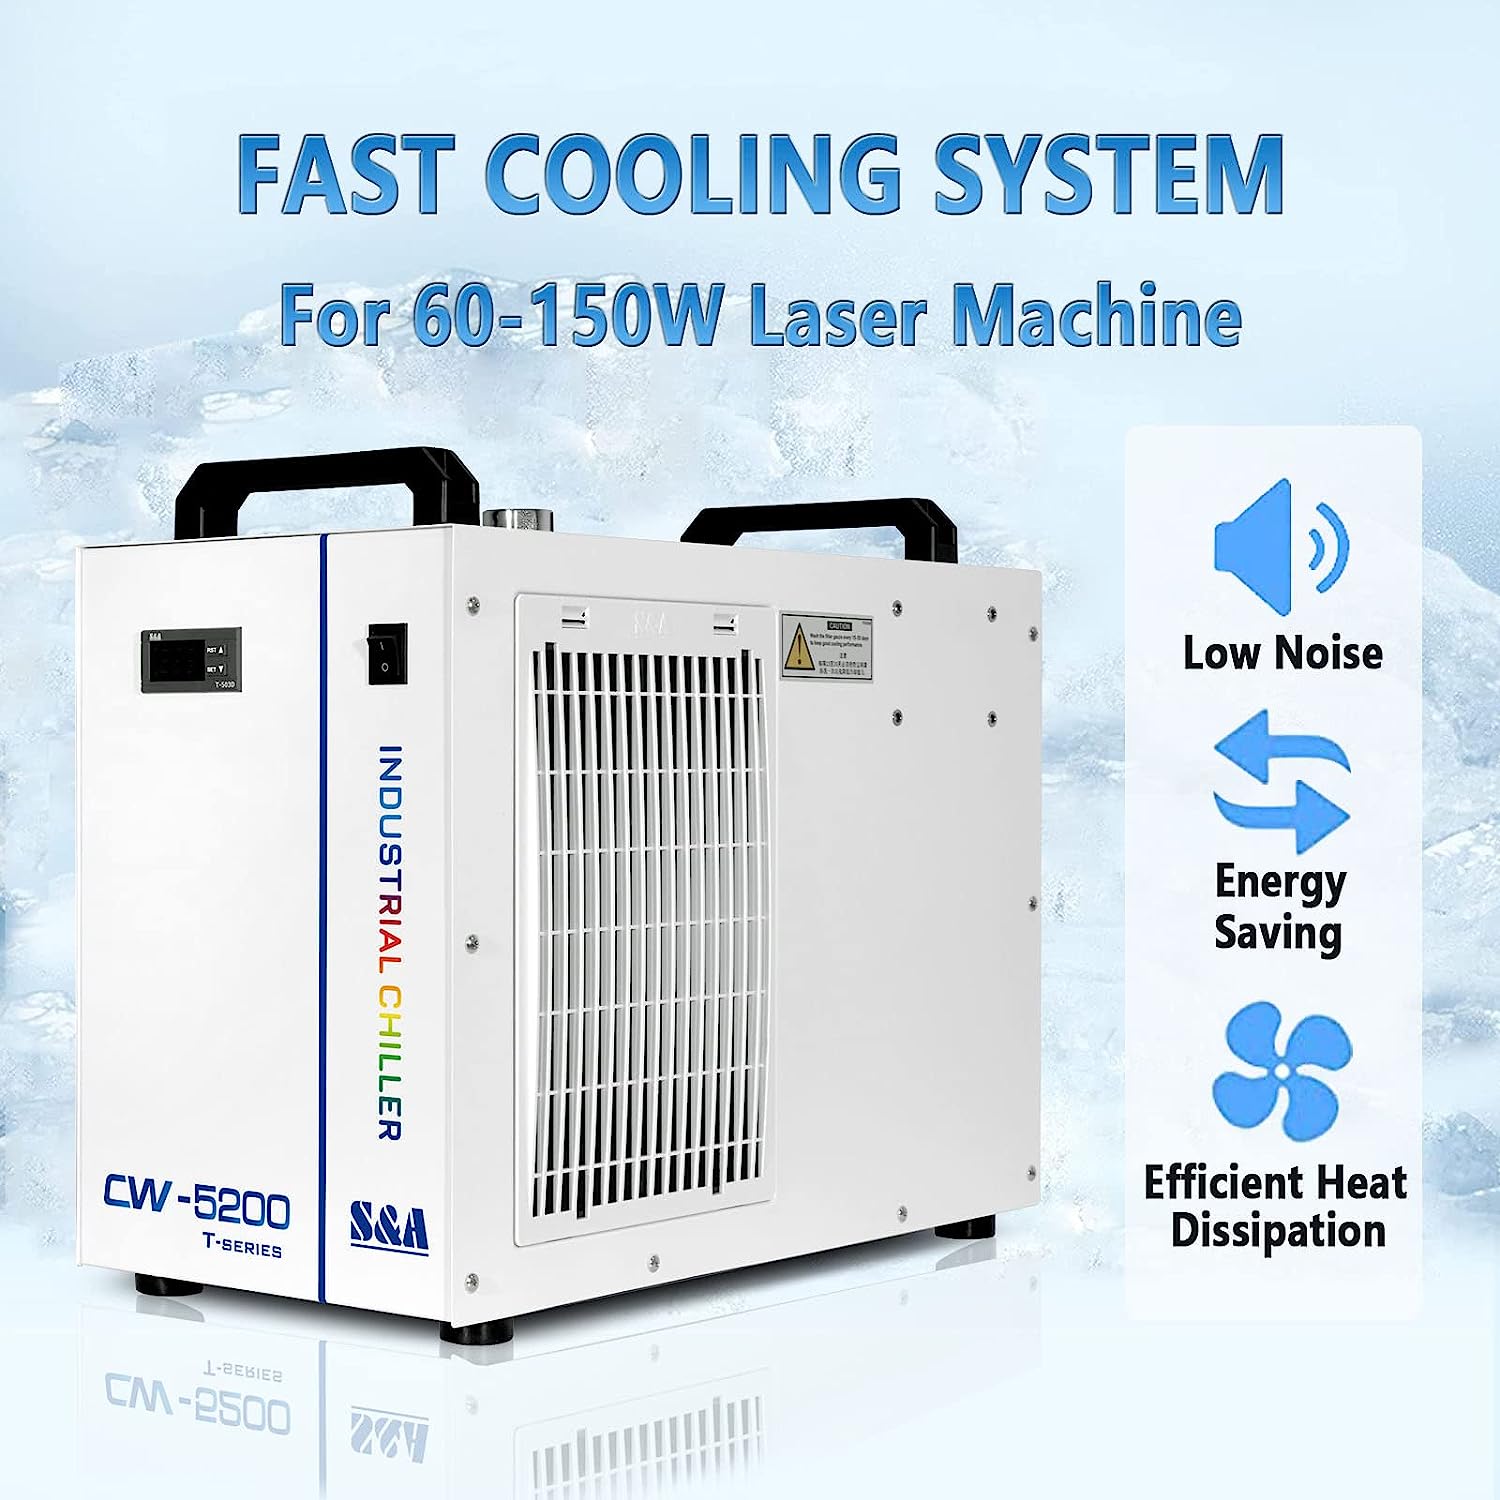 S&A Genuine CW-5202 Series (CW-5202DH/TH/DI/TI) Industrial Water Chiller Cooling Water